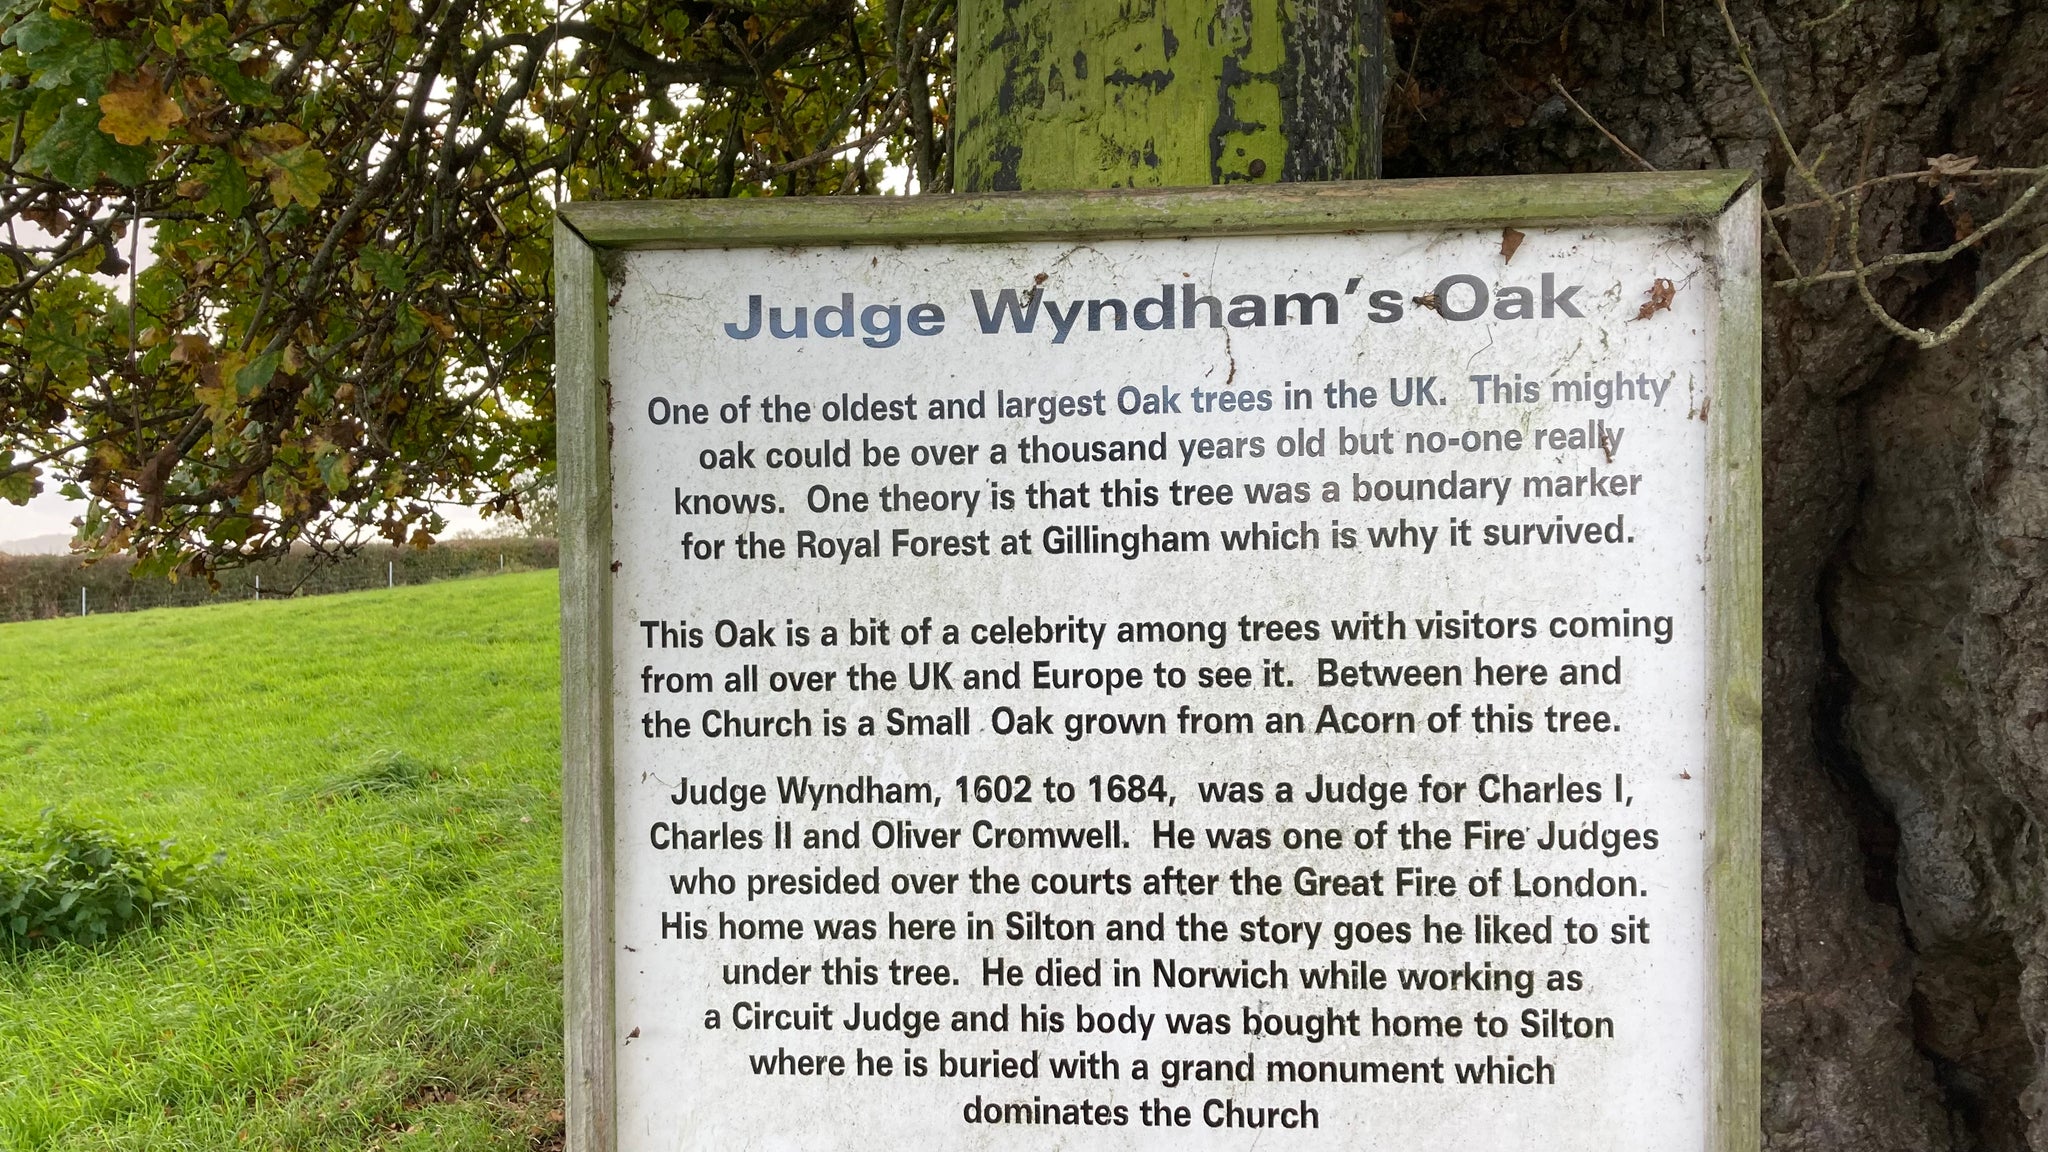 A sign telling of the history of Judge Wyndham’s Oak Tree